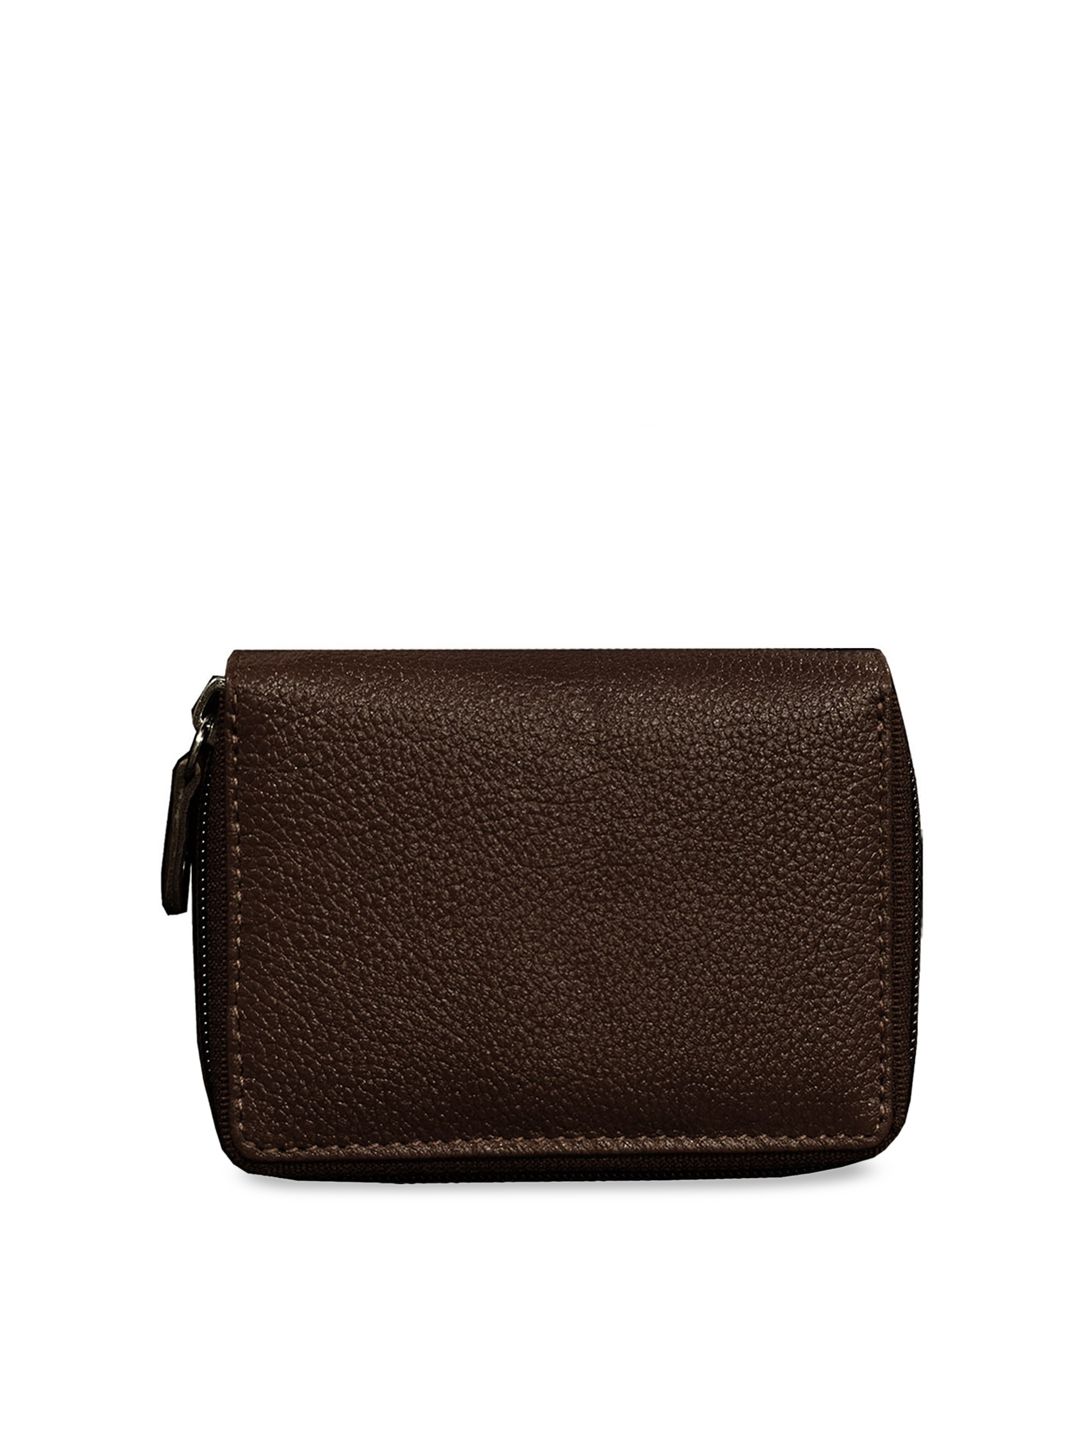 ABYS Unisex Coffee Brown Textured Genuine Leather Zip Around Wallet Price in India